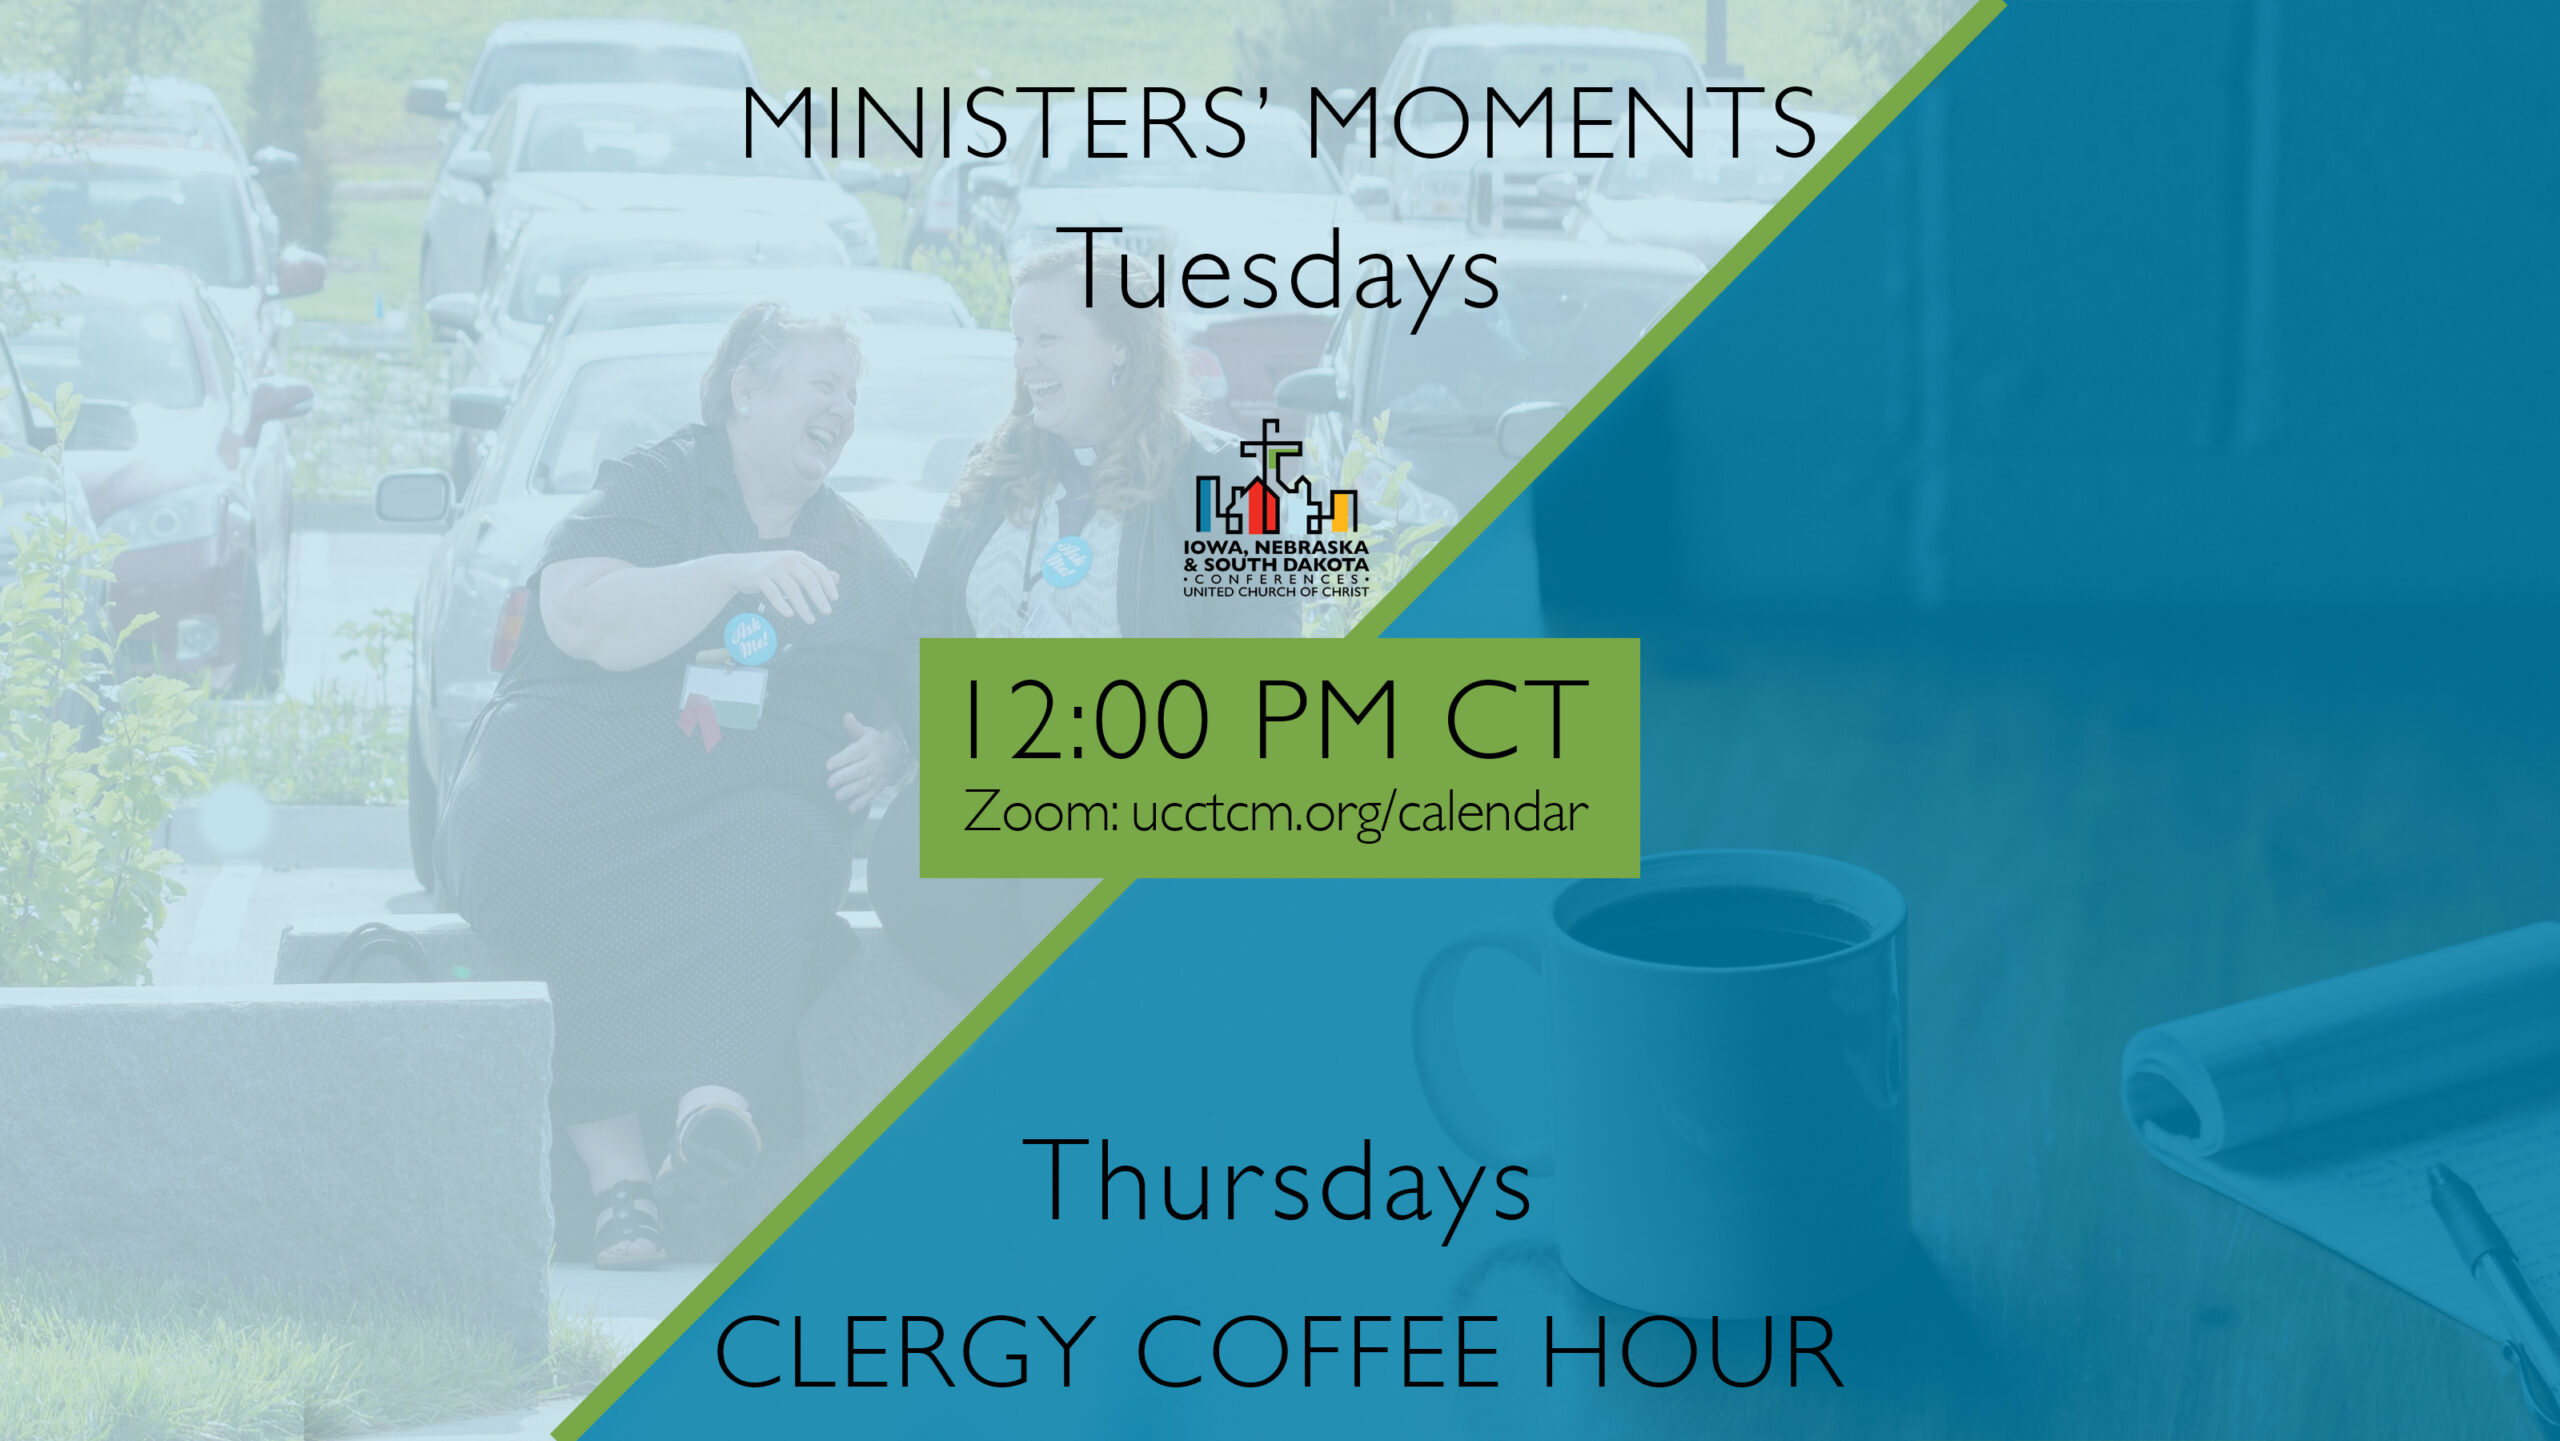 Ministers' Moments and Clergy Coffee Hour - Tuesdays and Thursdays at 12:00pm CT on Zoom